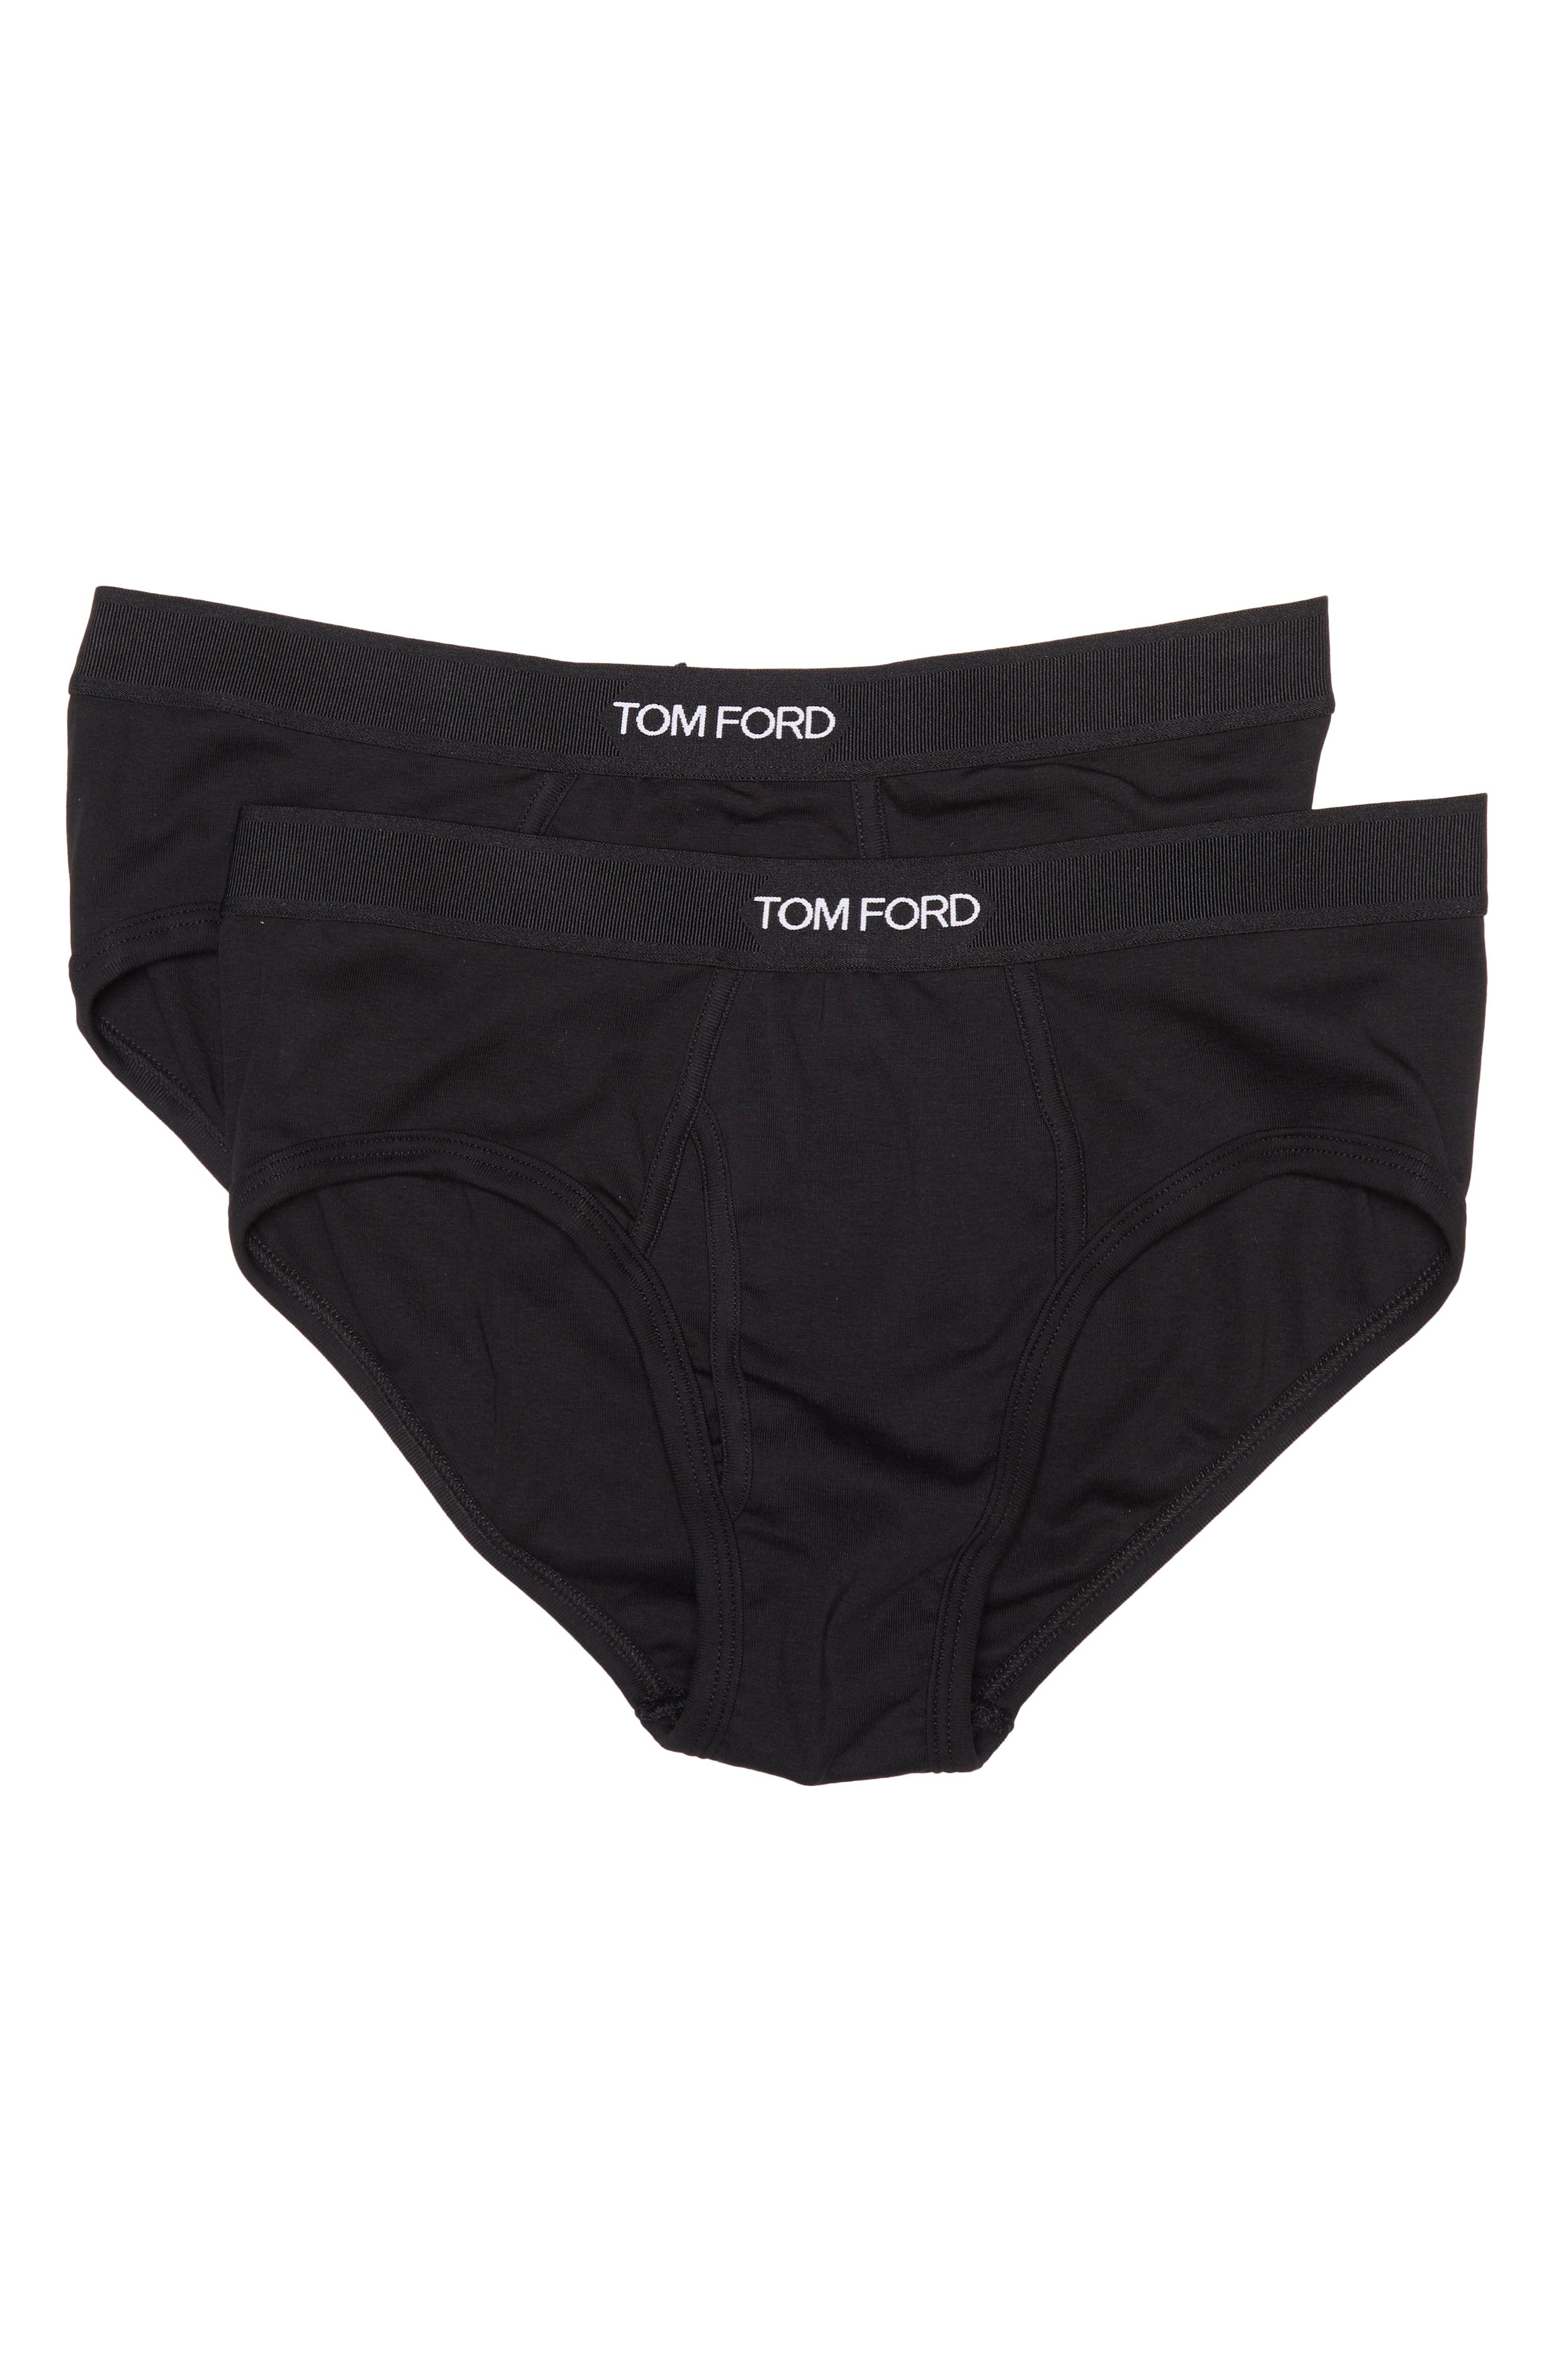 Tom Ford 2-Pack Cotton Stretch Jersey Briefs in White at Nordstrom